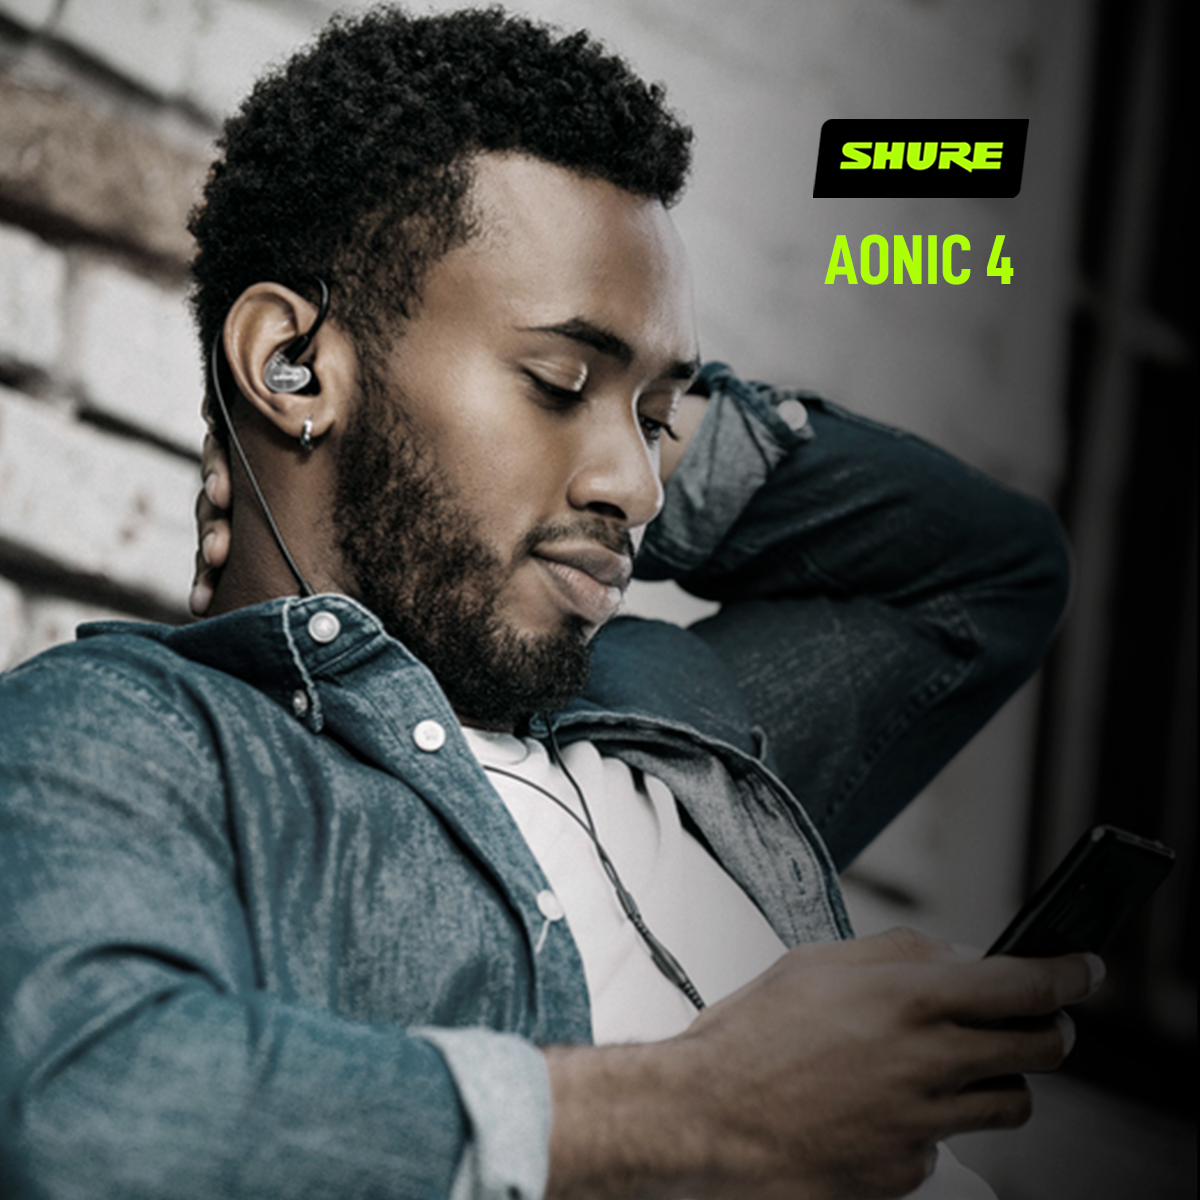 AONIC 4 SHURE AUDIFONOS